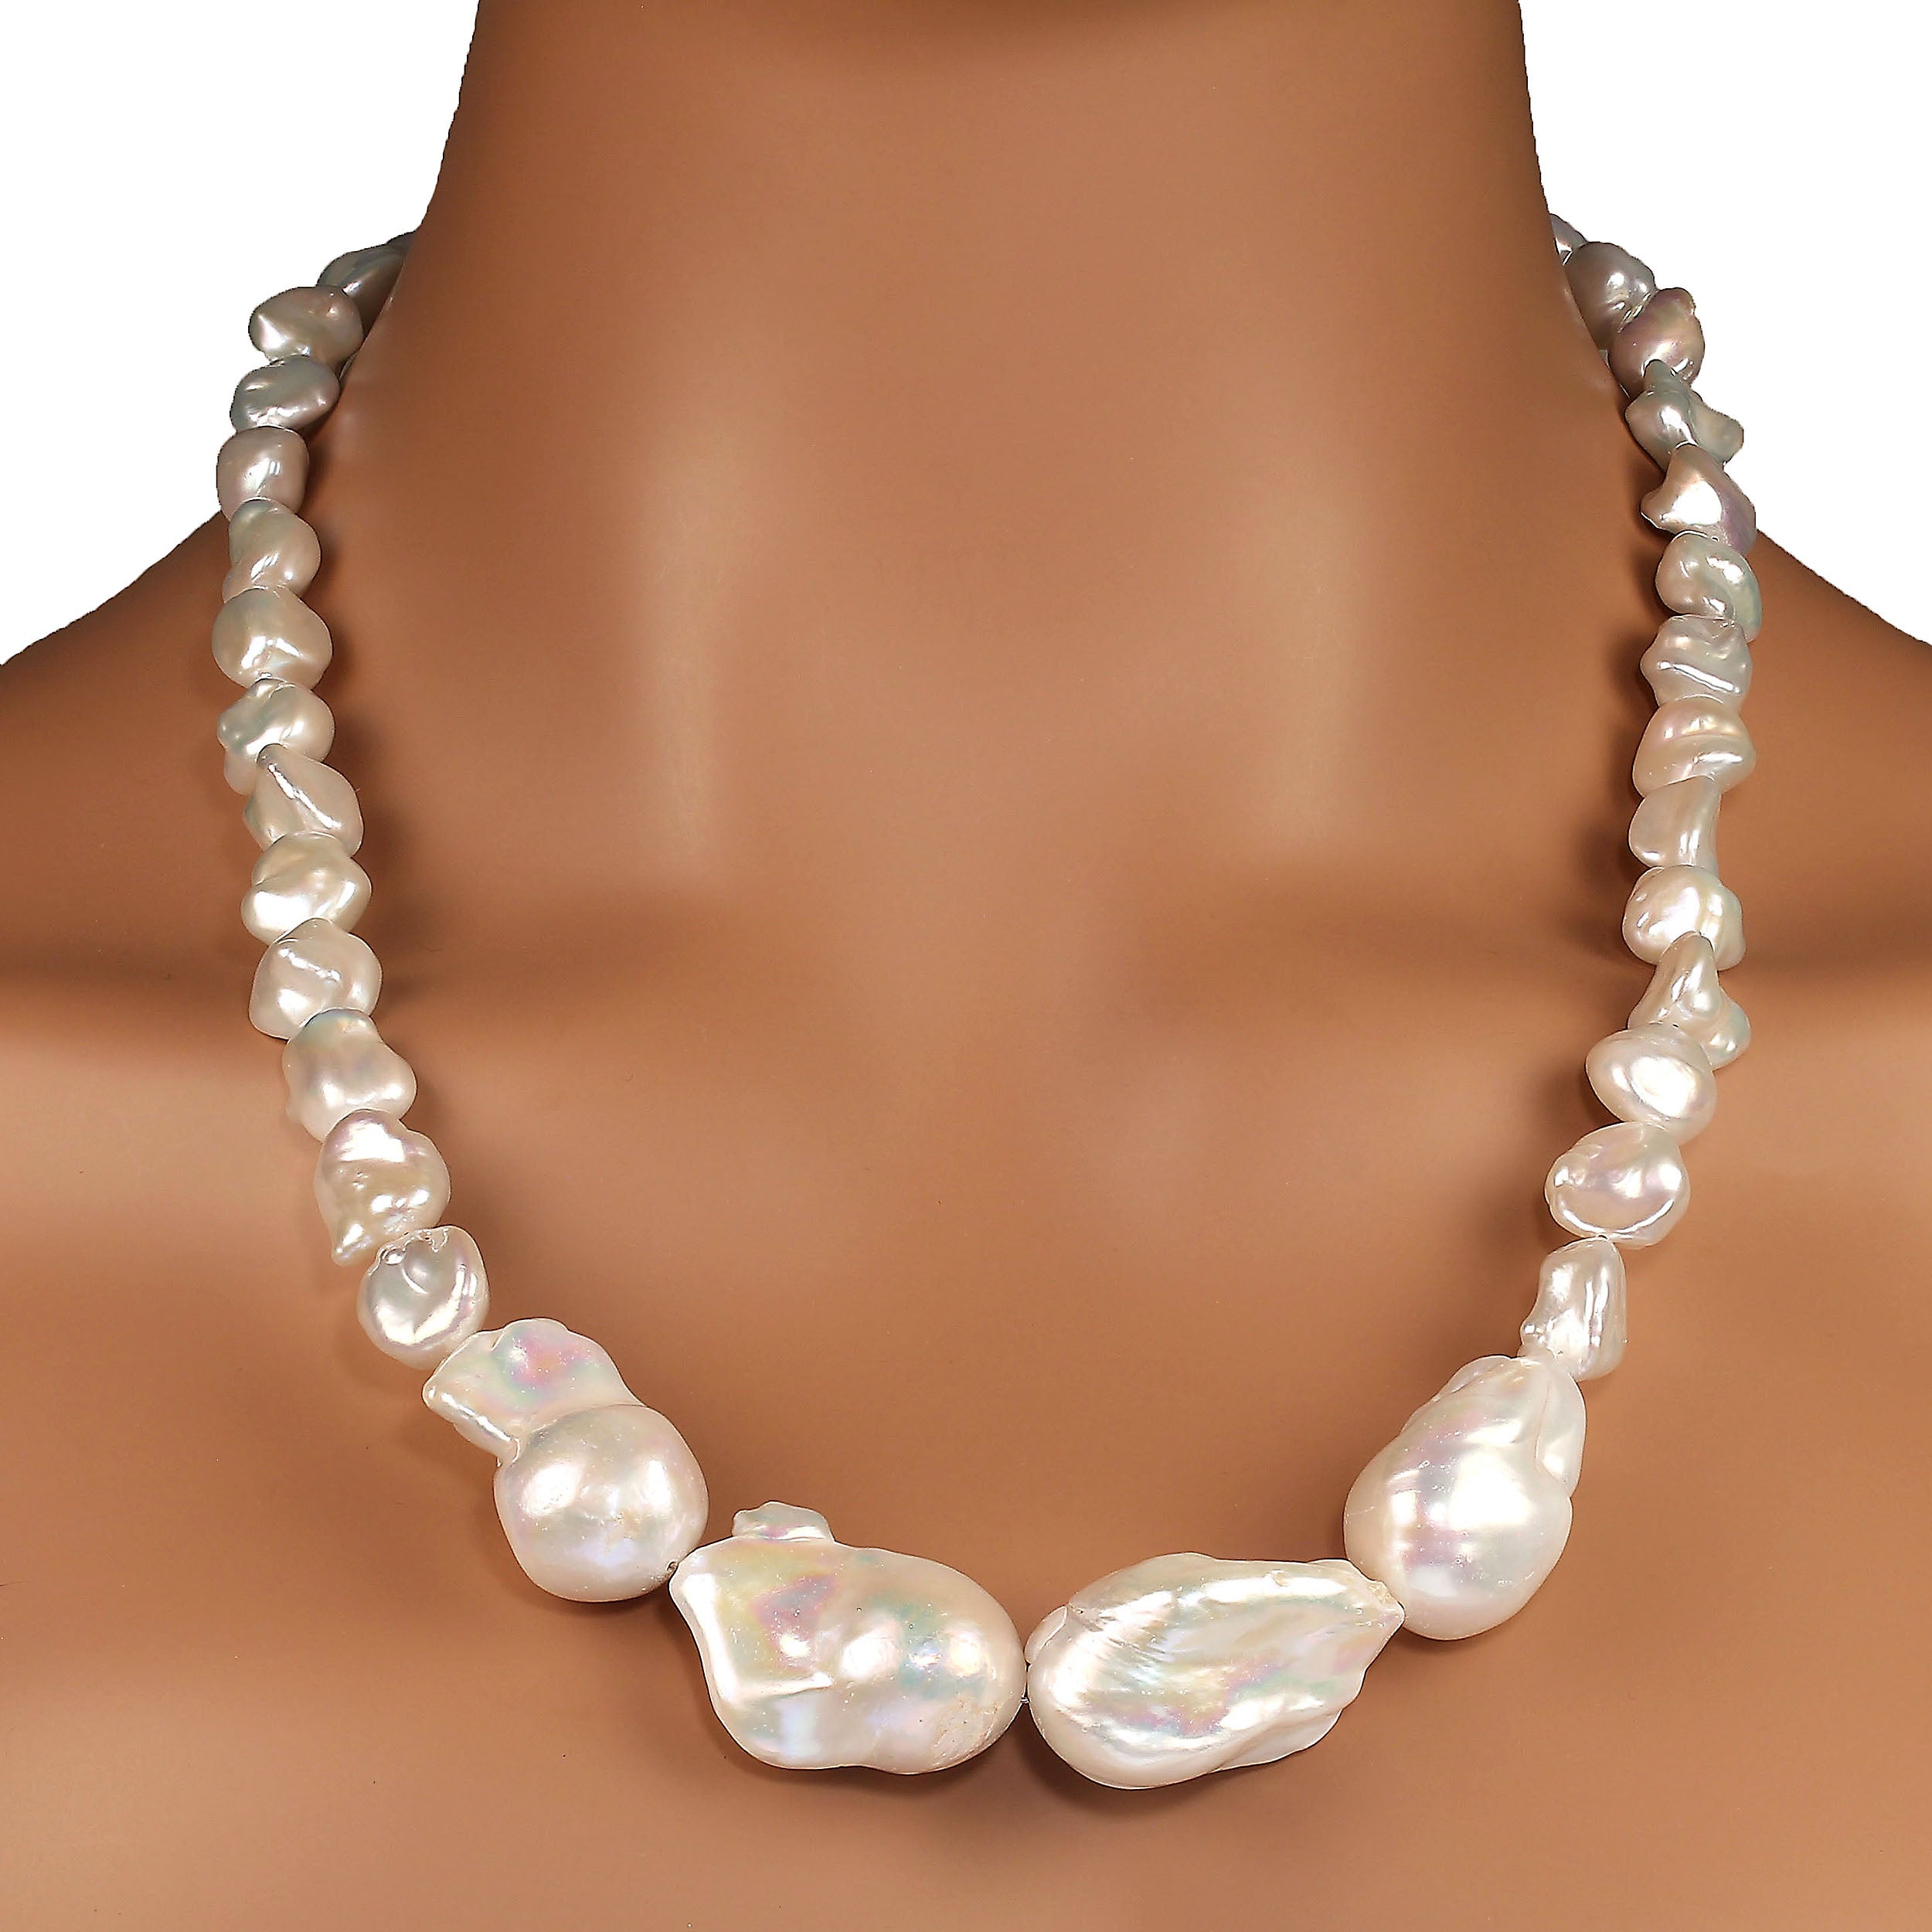 AJD 23 Inch White Pearl Statement necklace with Four Front Focal Pearls.  For Sale